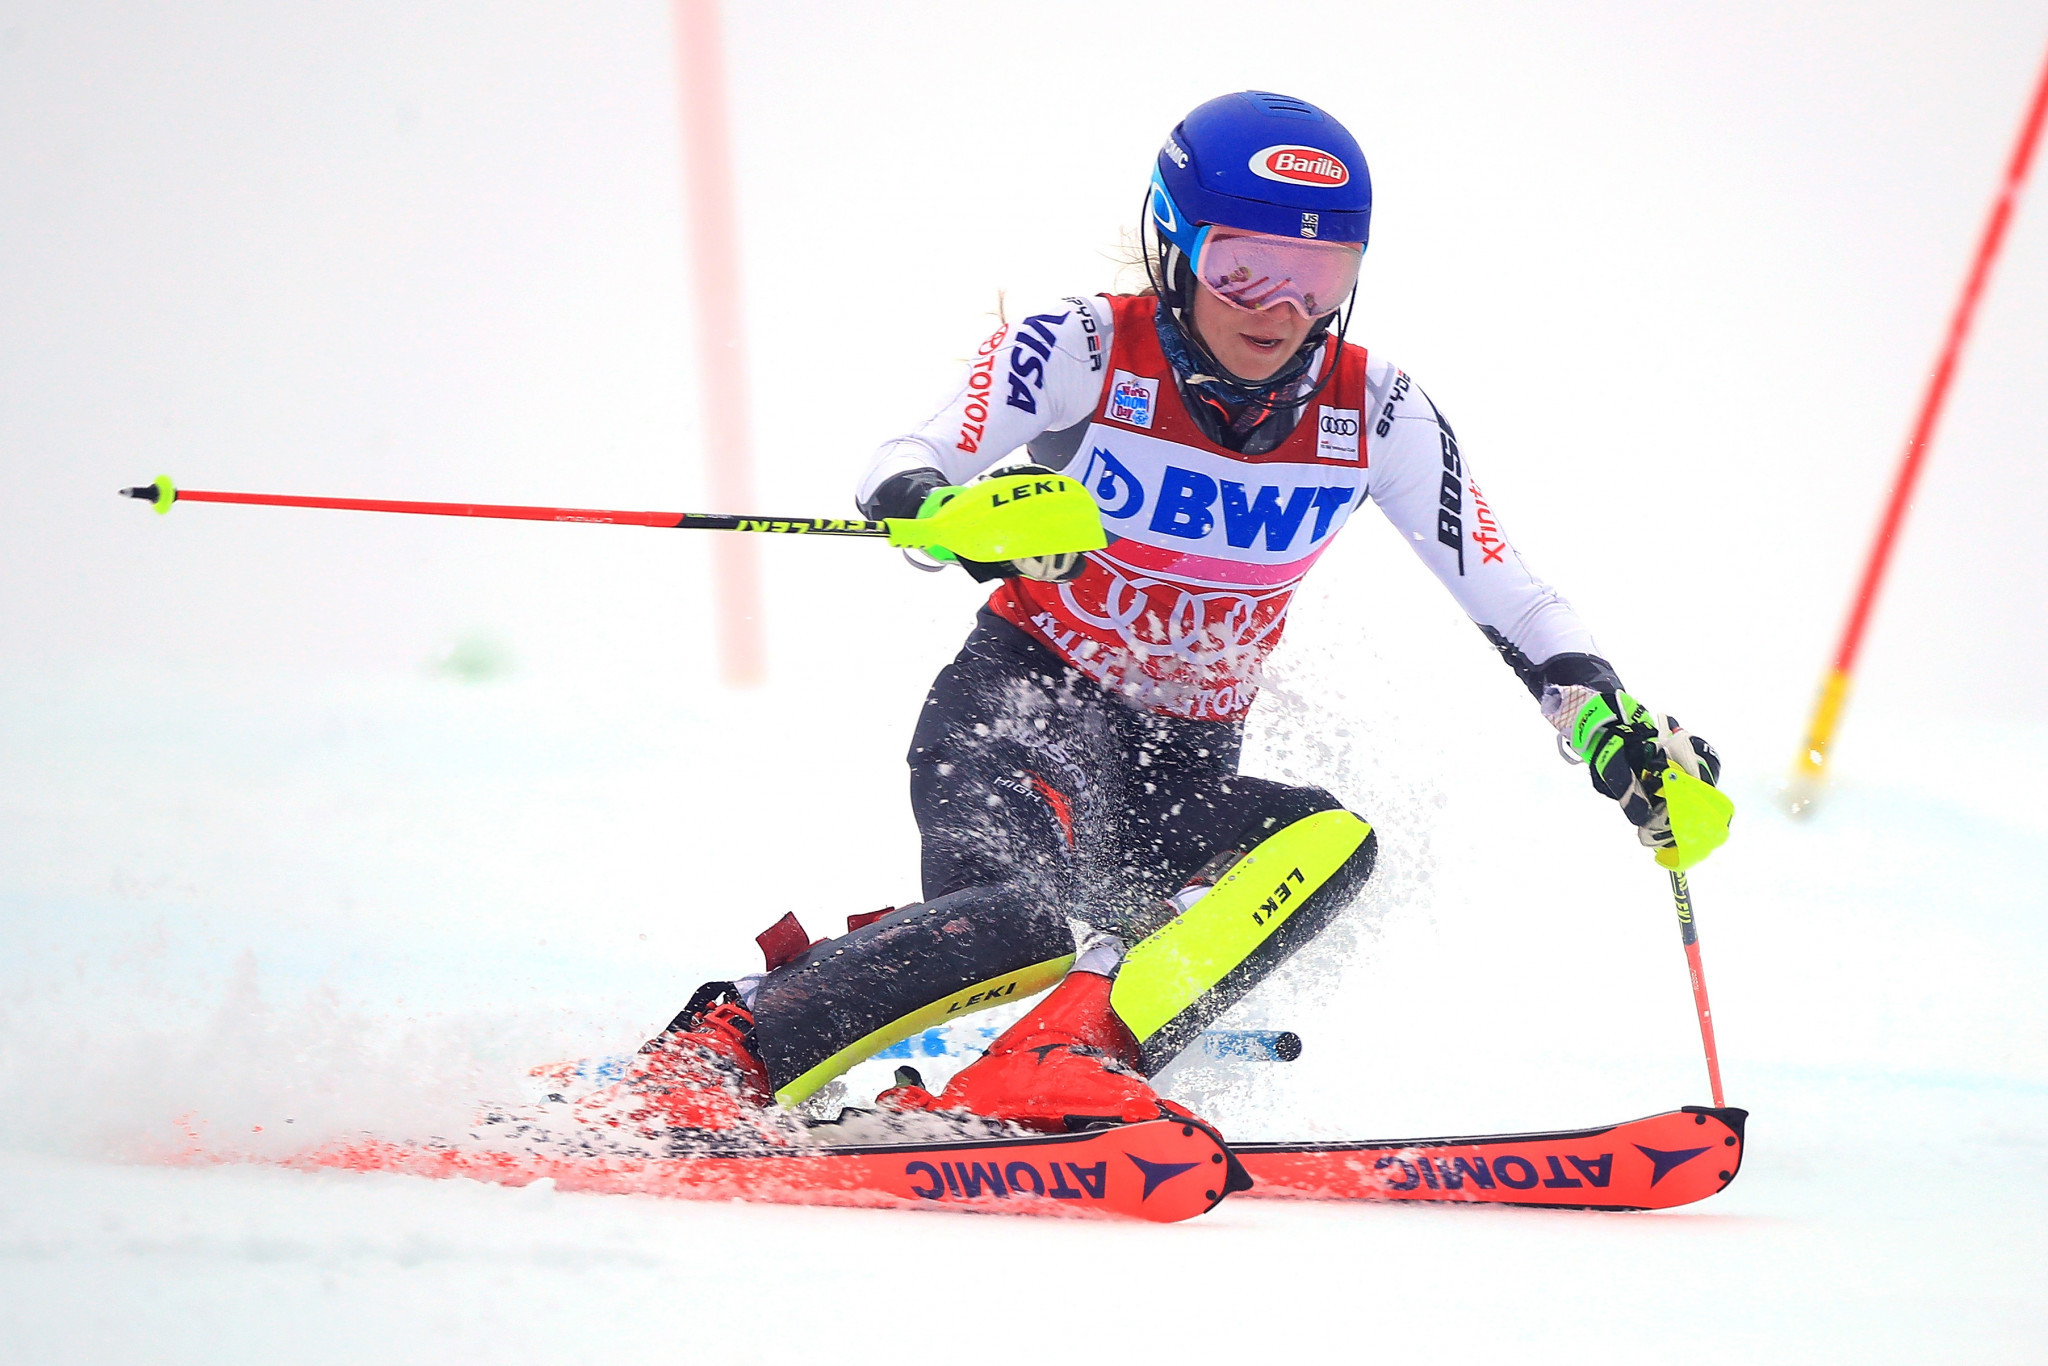 Shiffrin storms to home slalom victory at Alpine Skiing World Cup in Killington